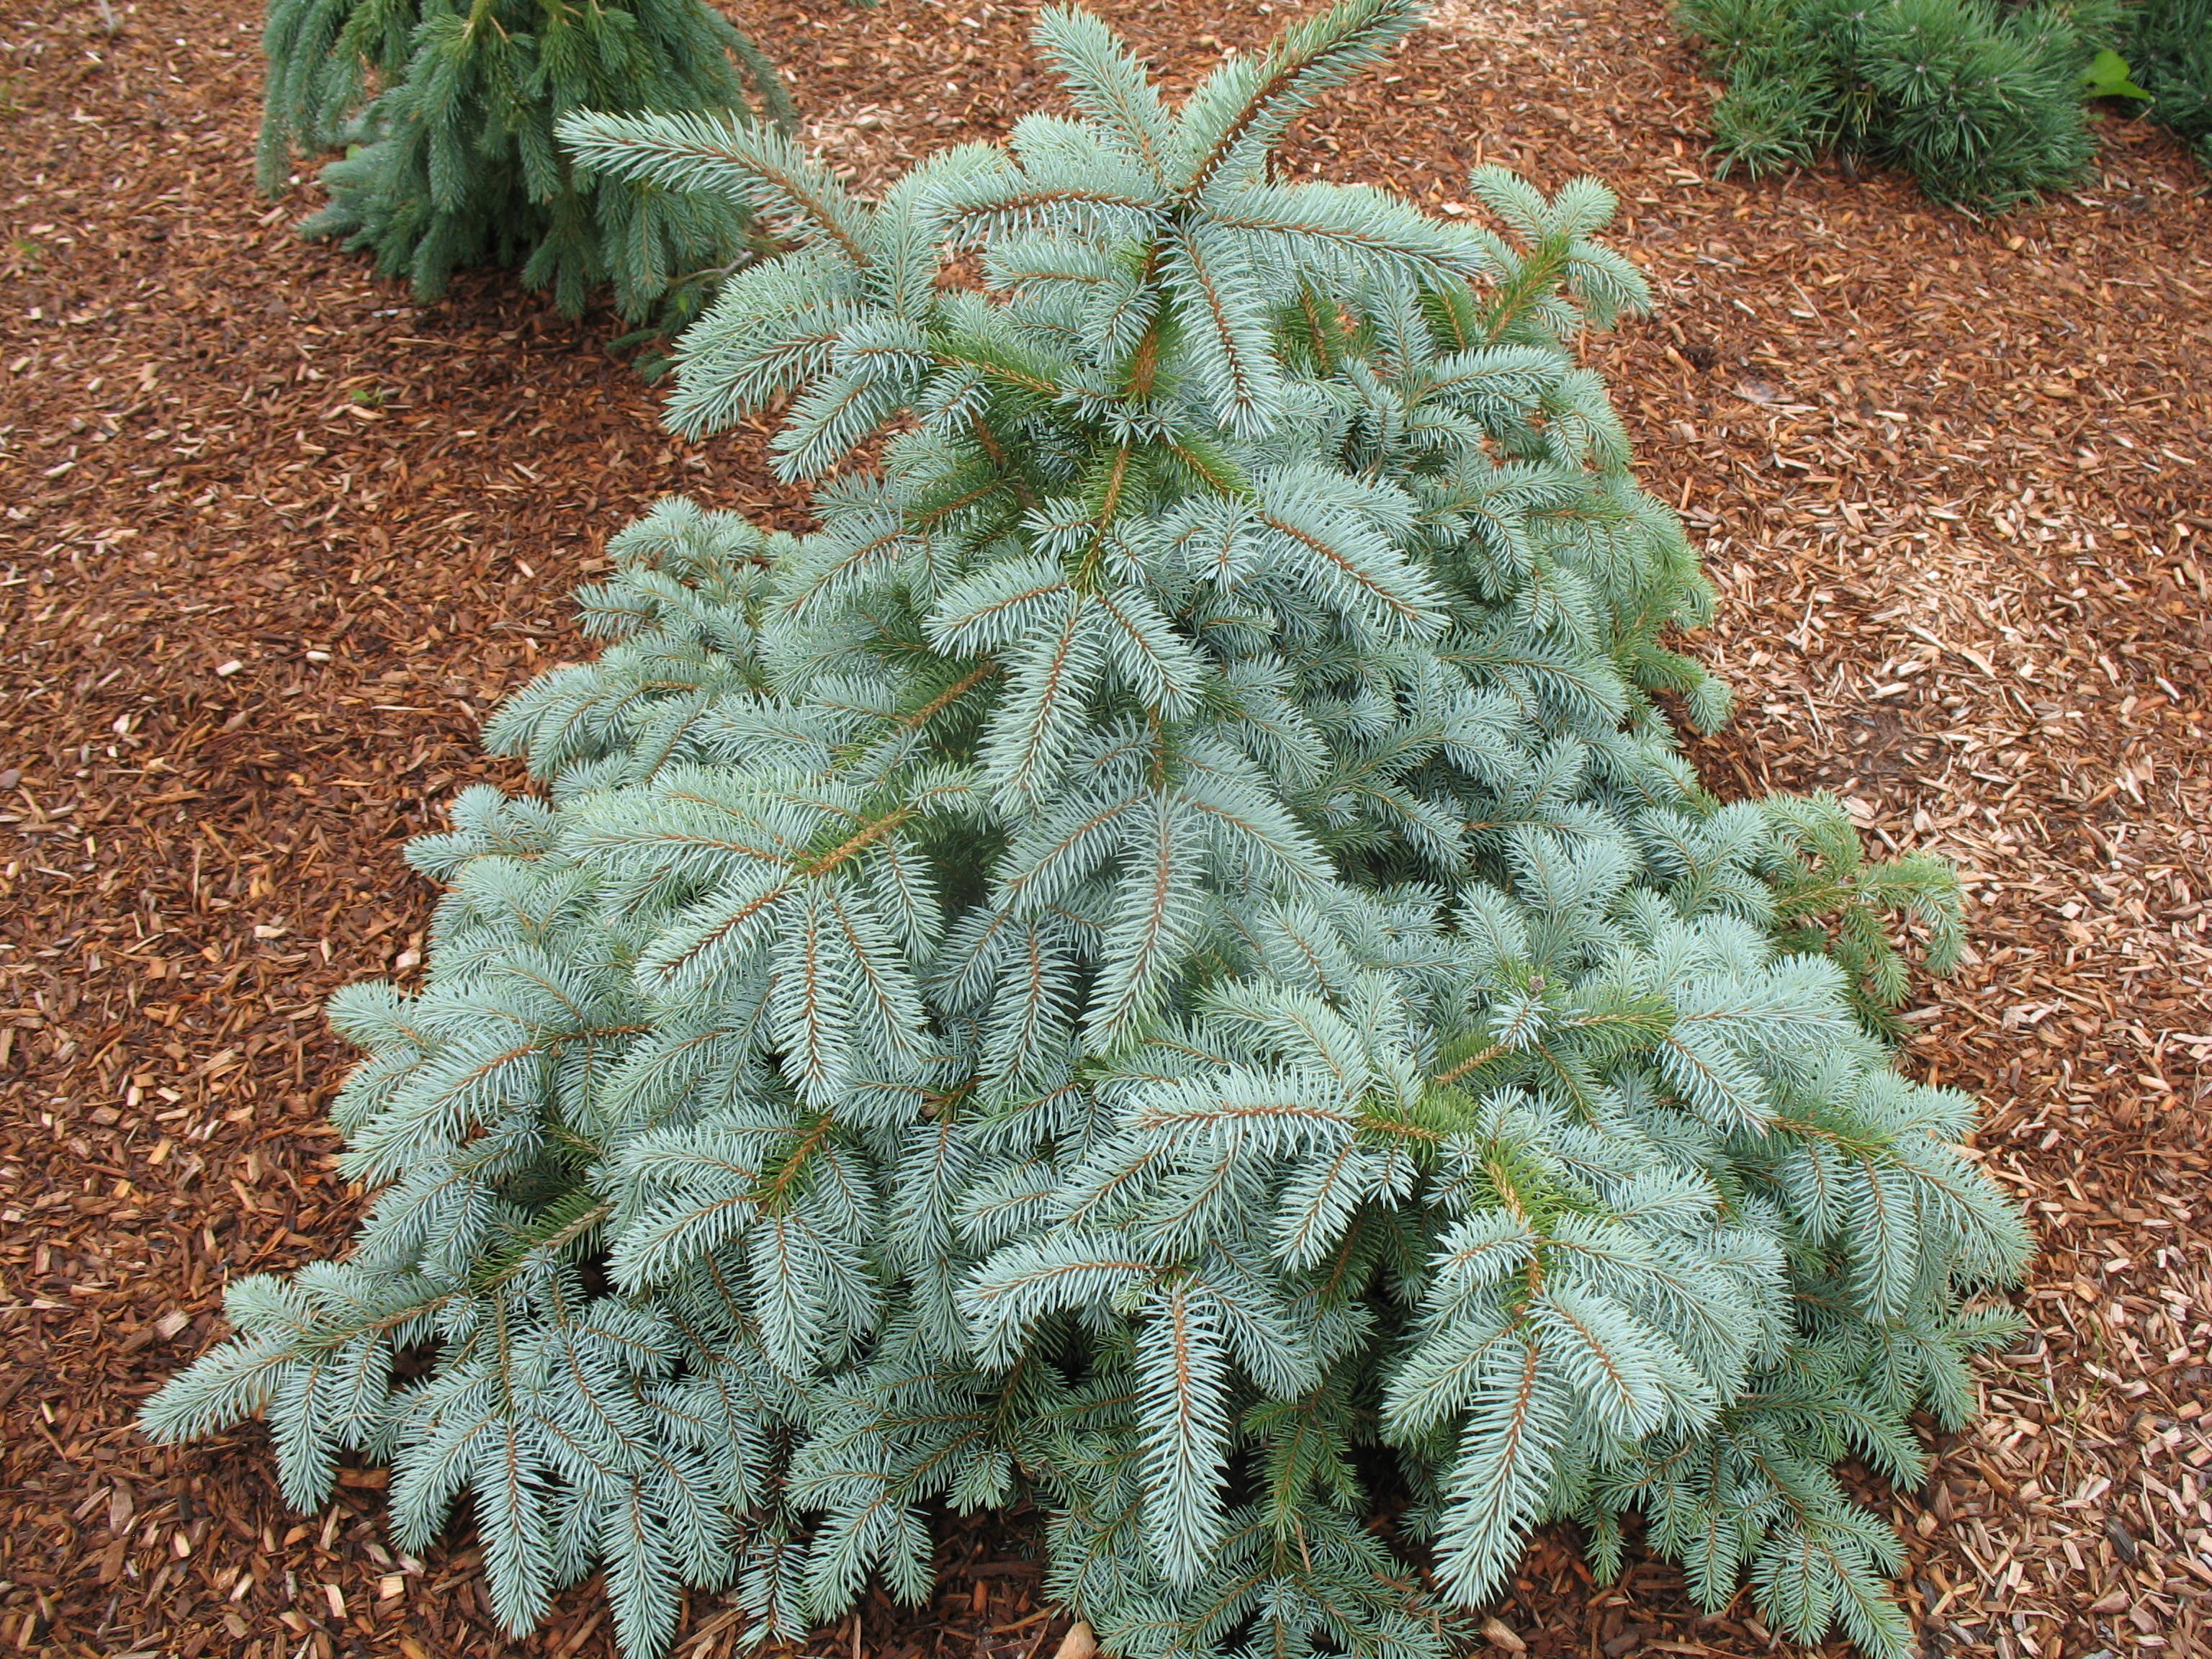 Picea pungens glauca 'Henry B. Fowler' / Picea pungens glauca 'Henry B. Fowler'